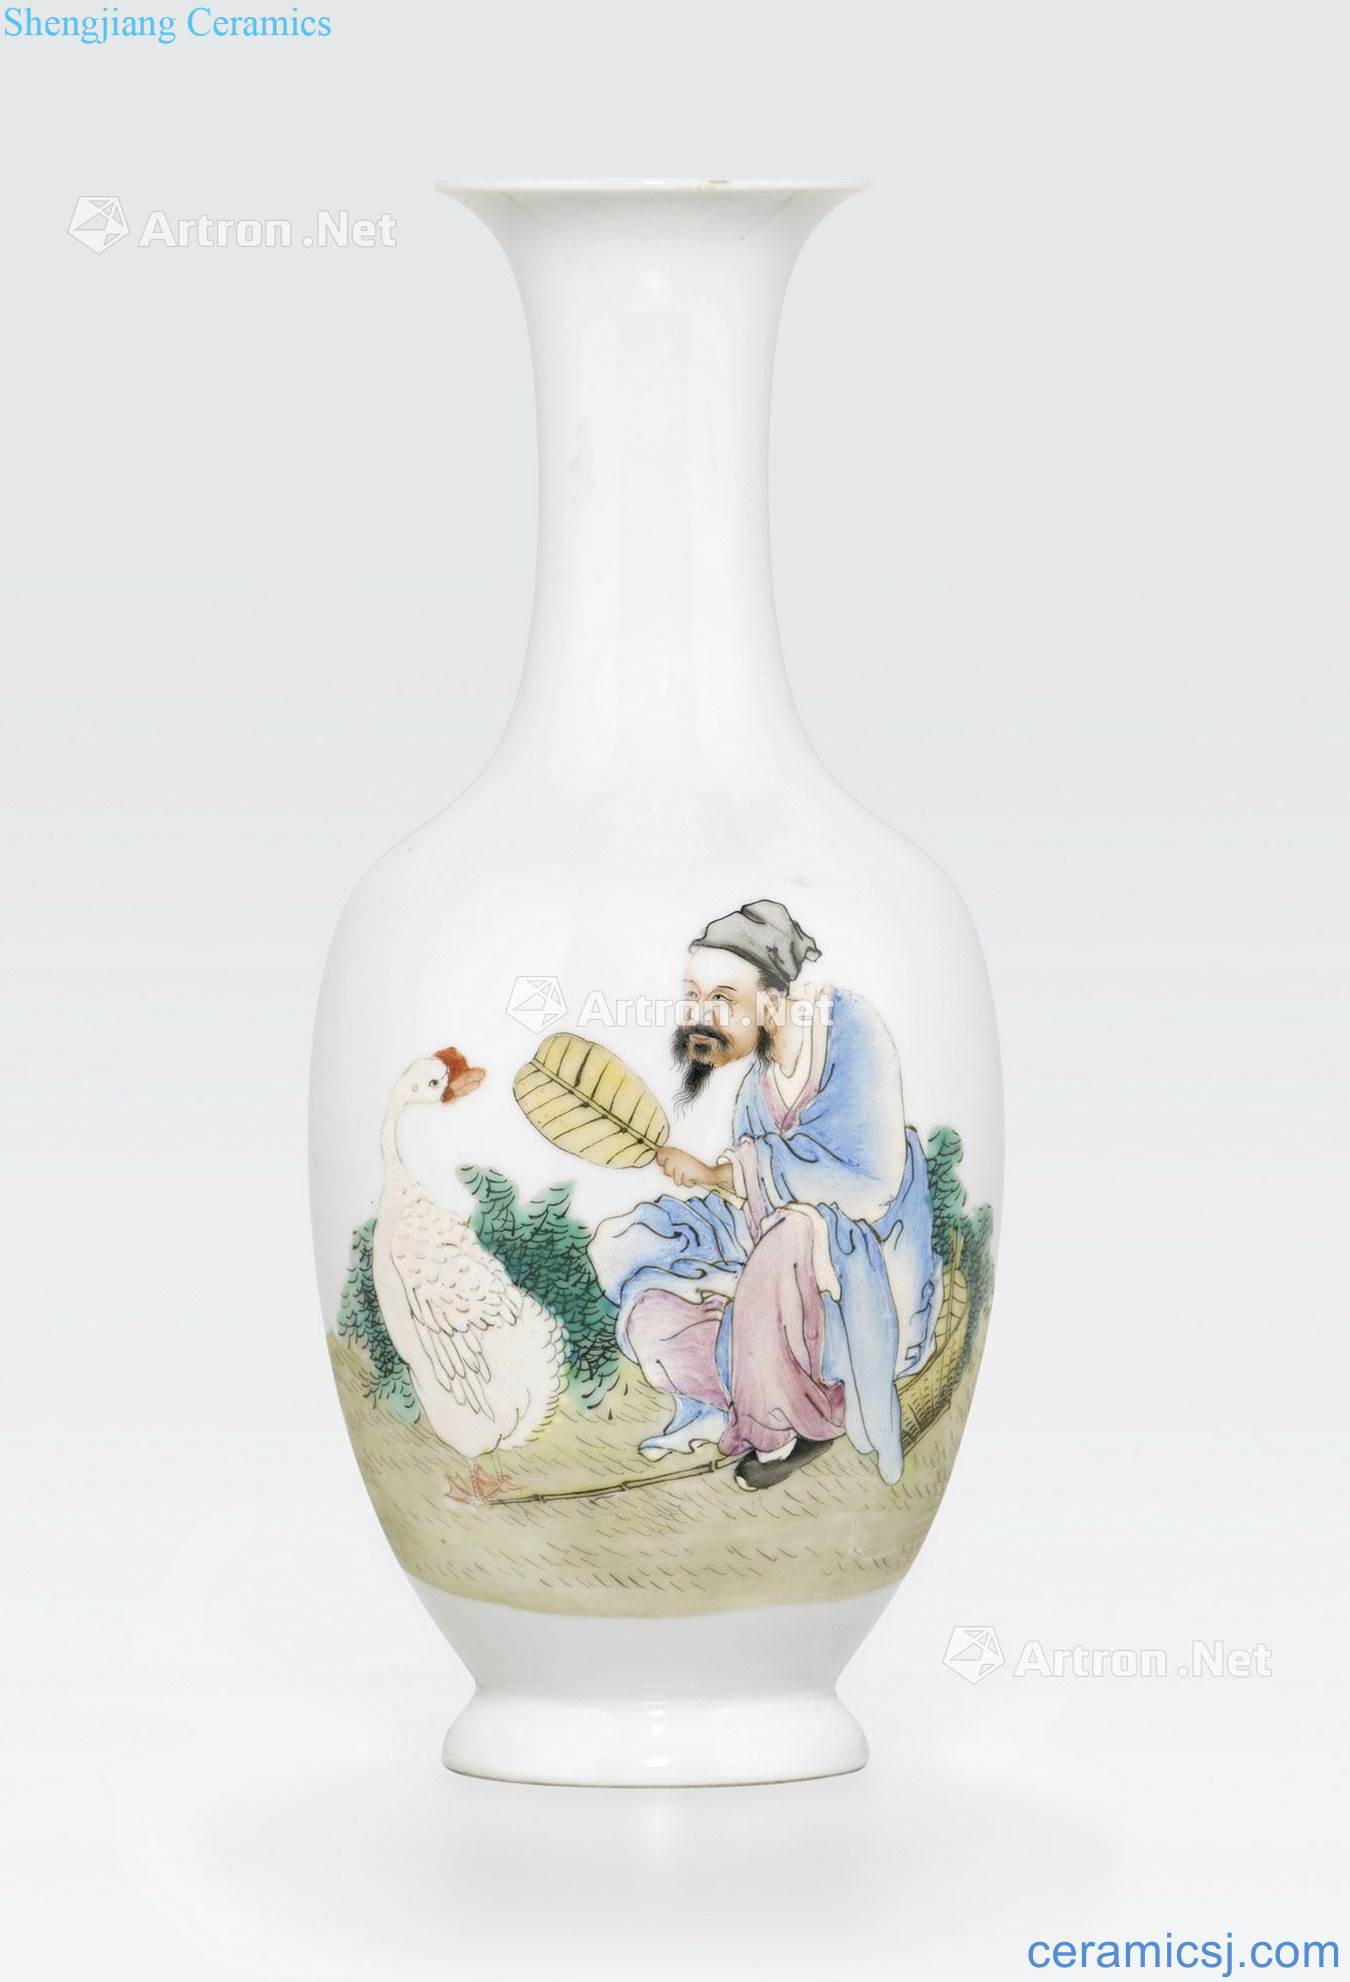 Qianlong mark, the Republic period A SMALL FAMILLE ROSE ENAMELED BALUSTER VASE